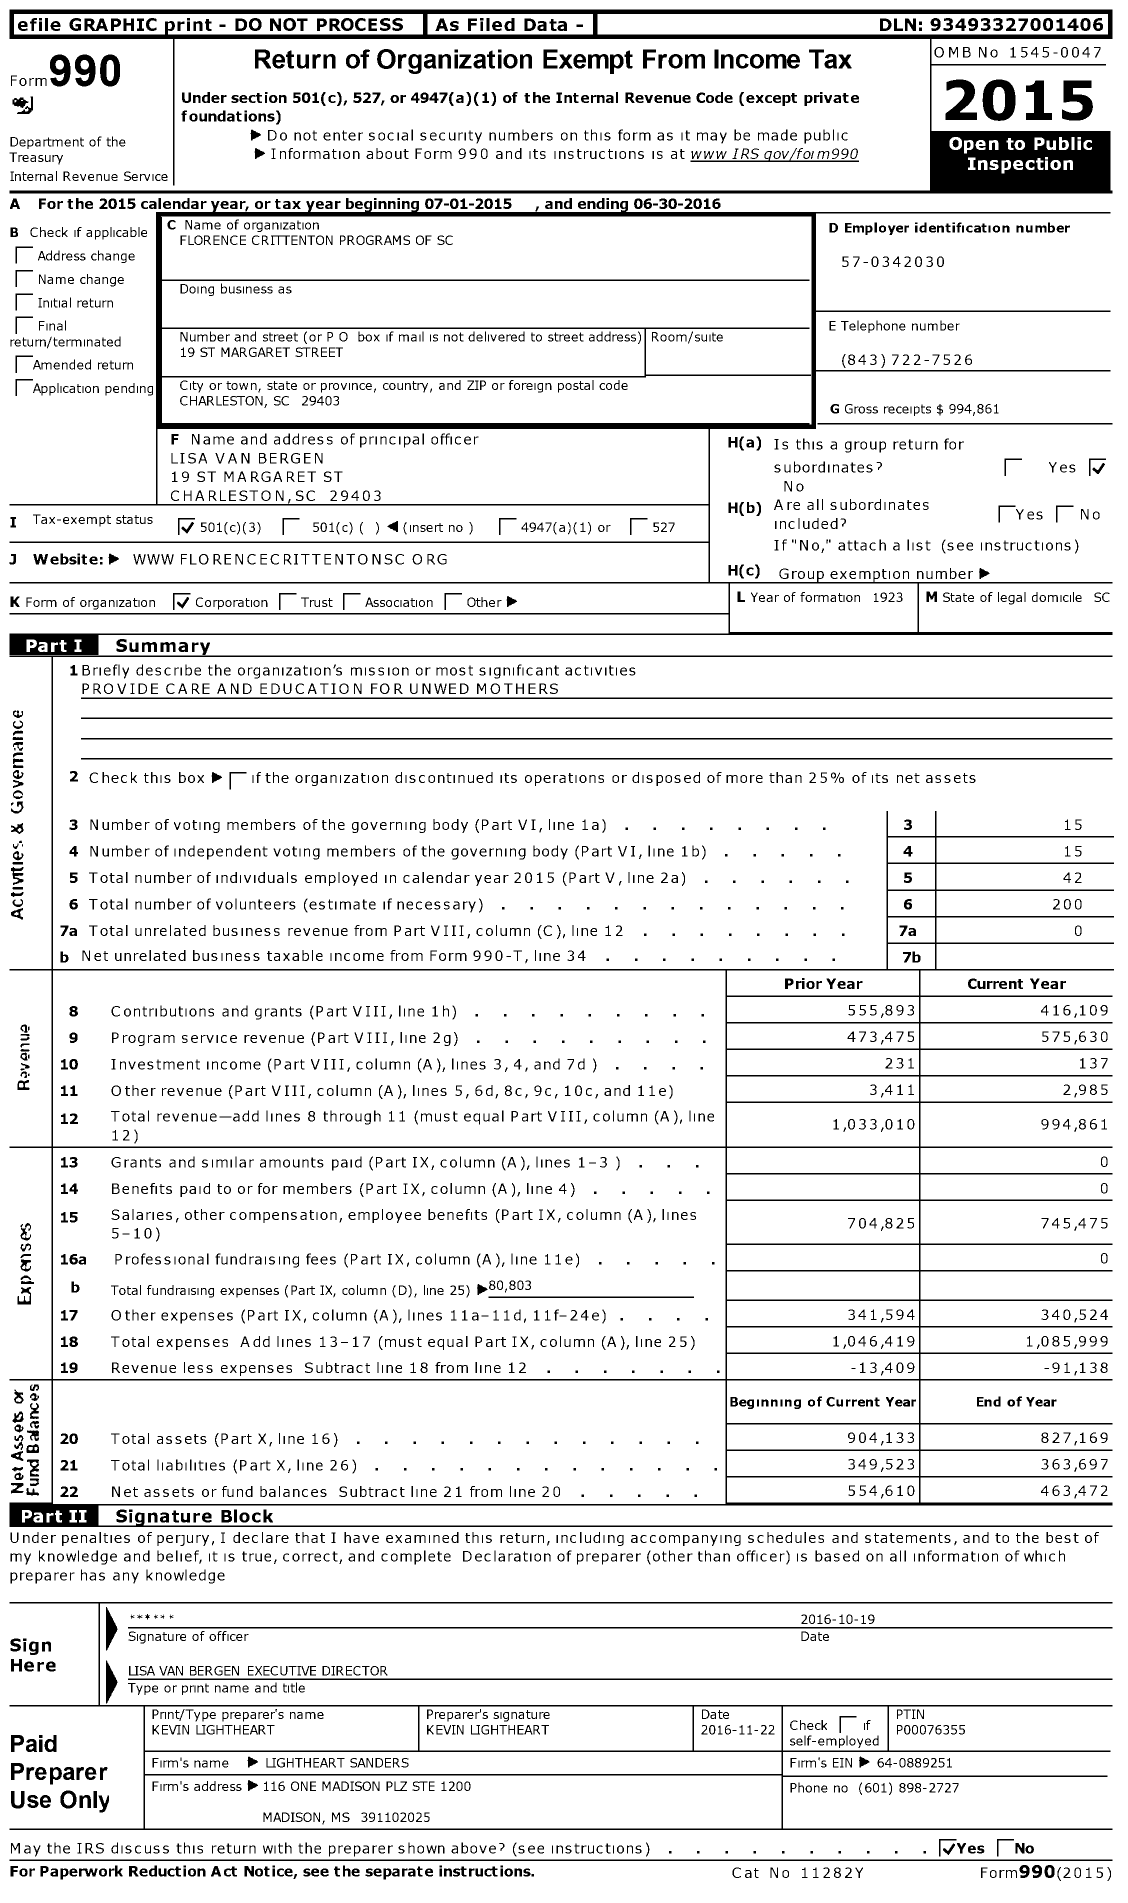 Image of first page of 2015 Form 990 for Florence Crittenton Programs of SC